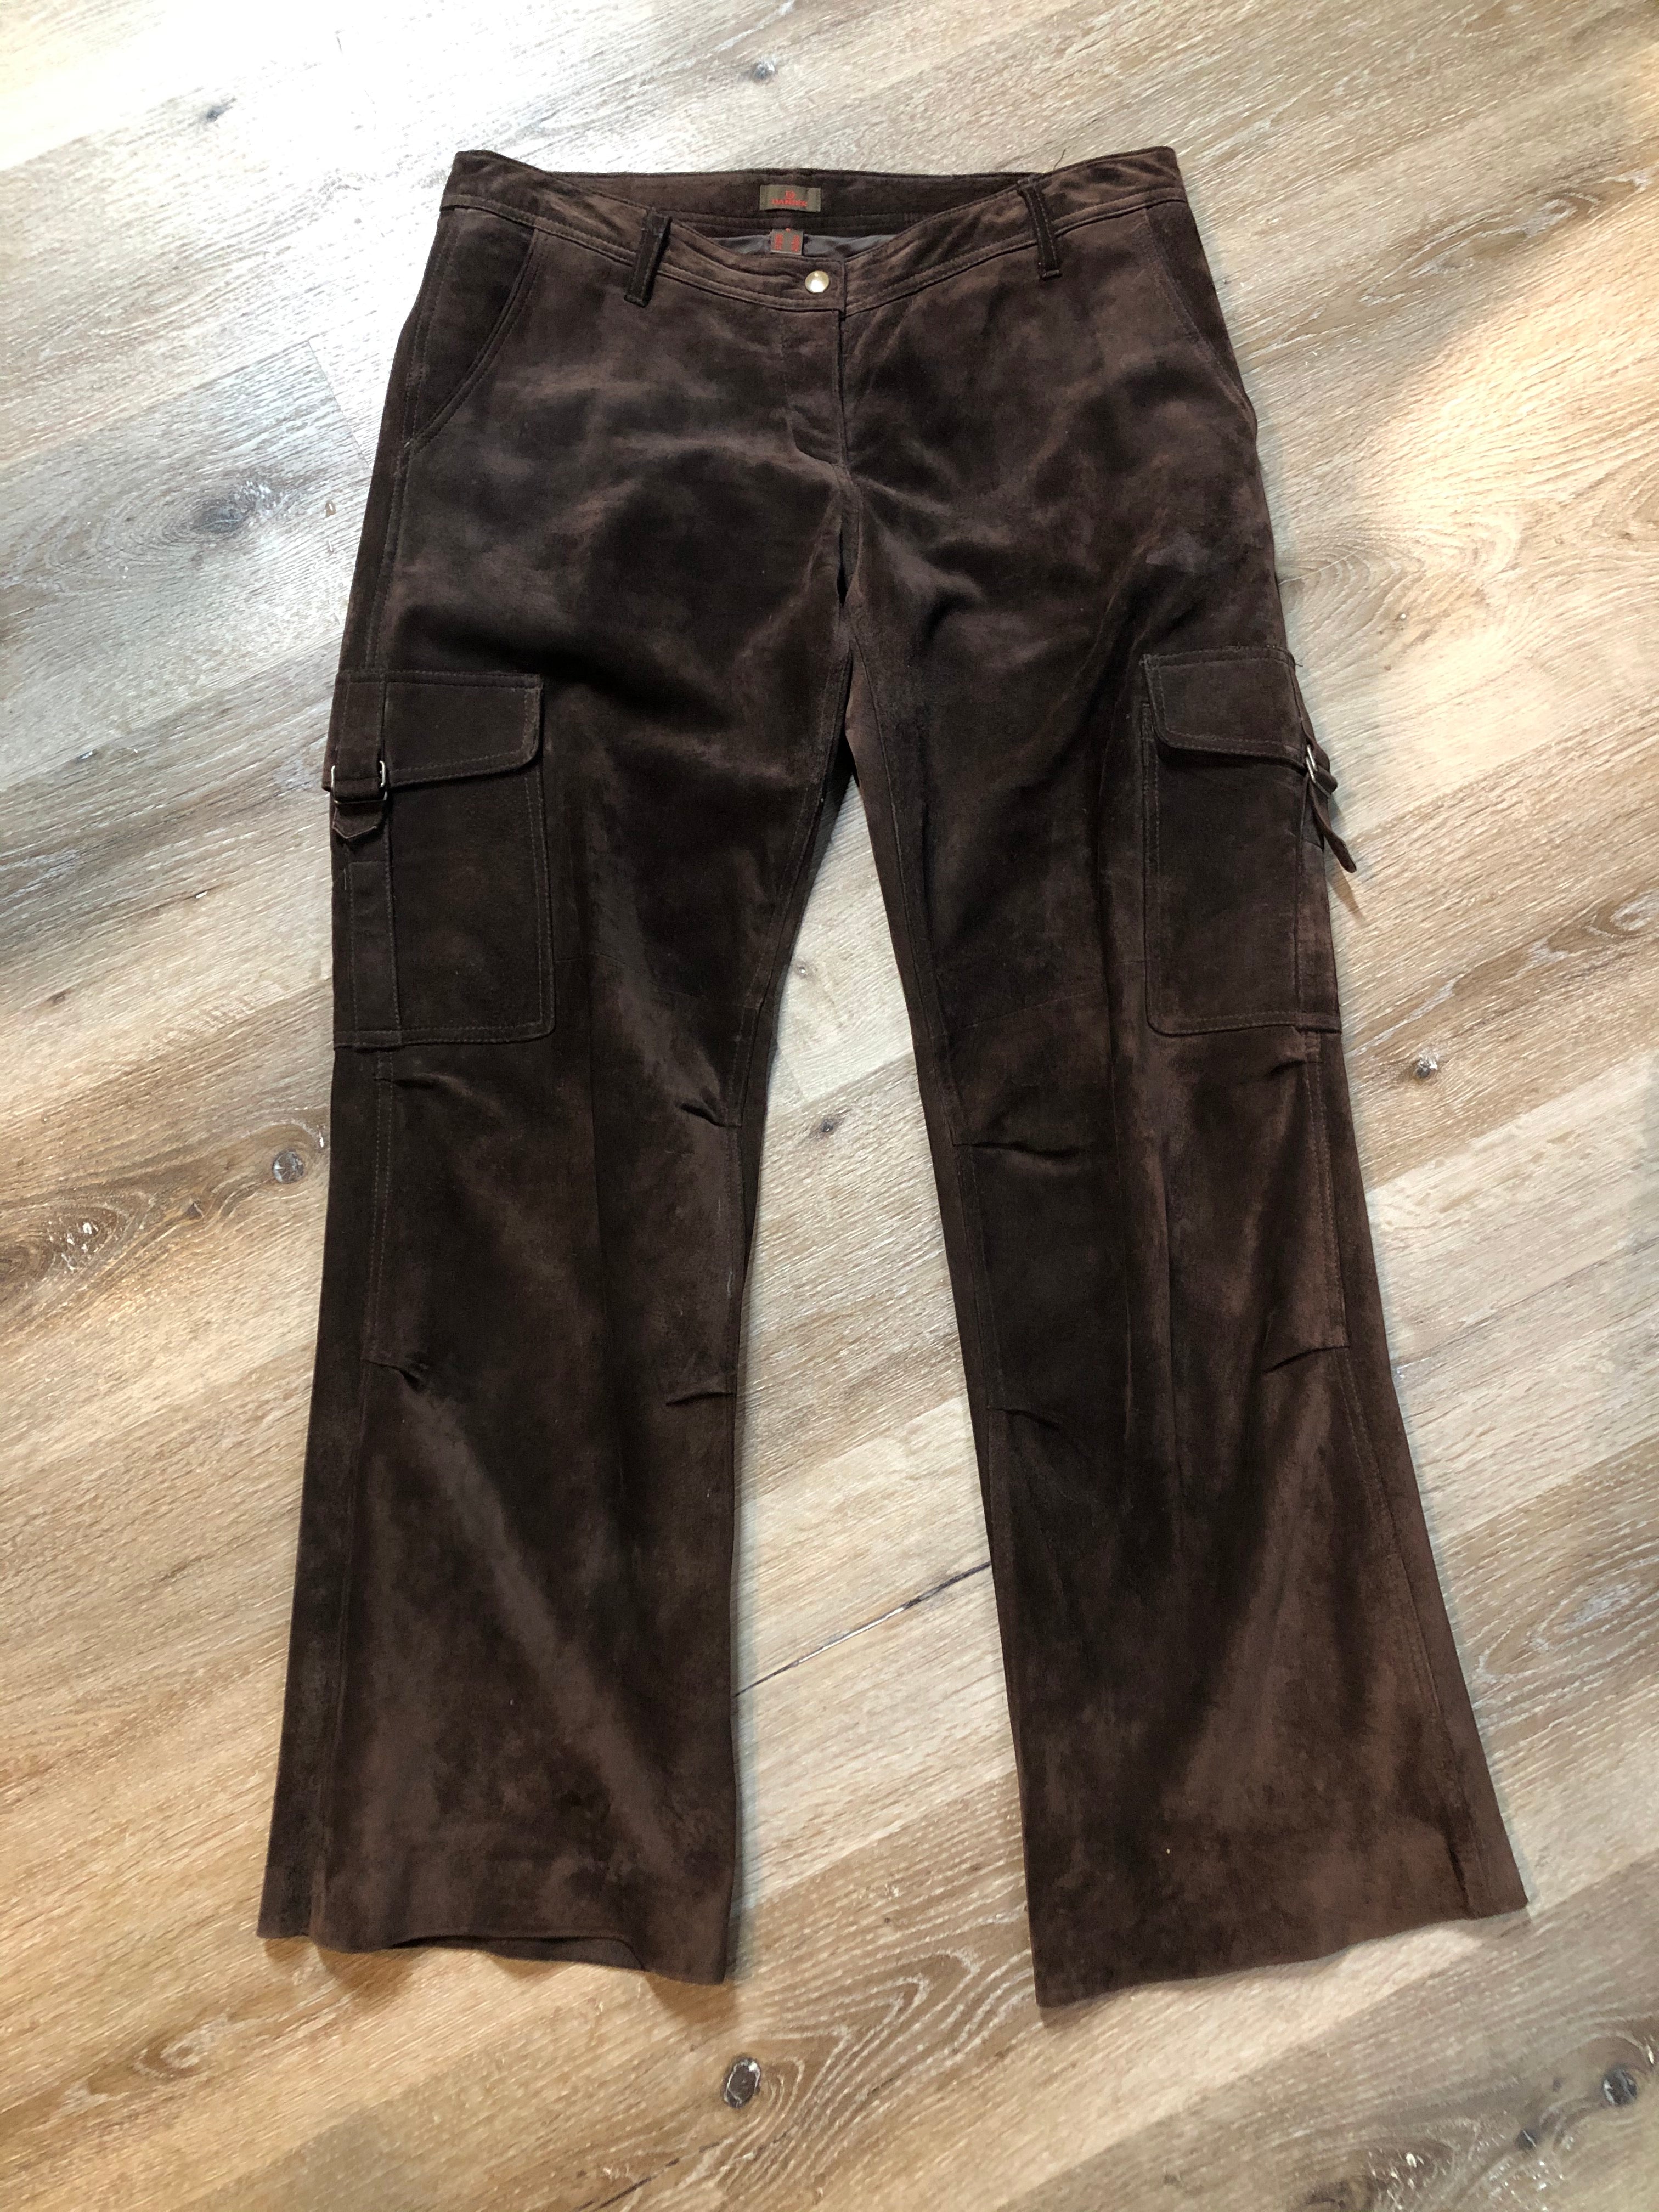 Leather Pants / Vintage Danier Brown Suede High Waist Leather